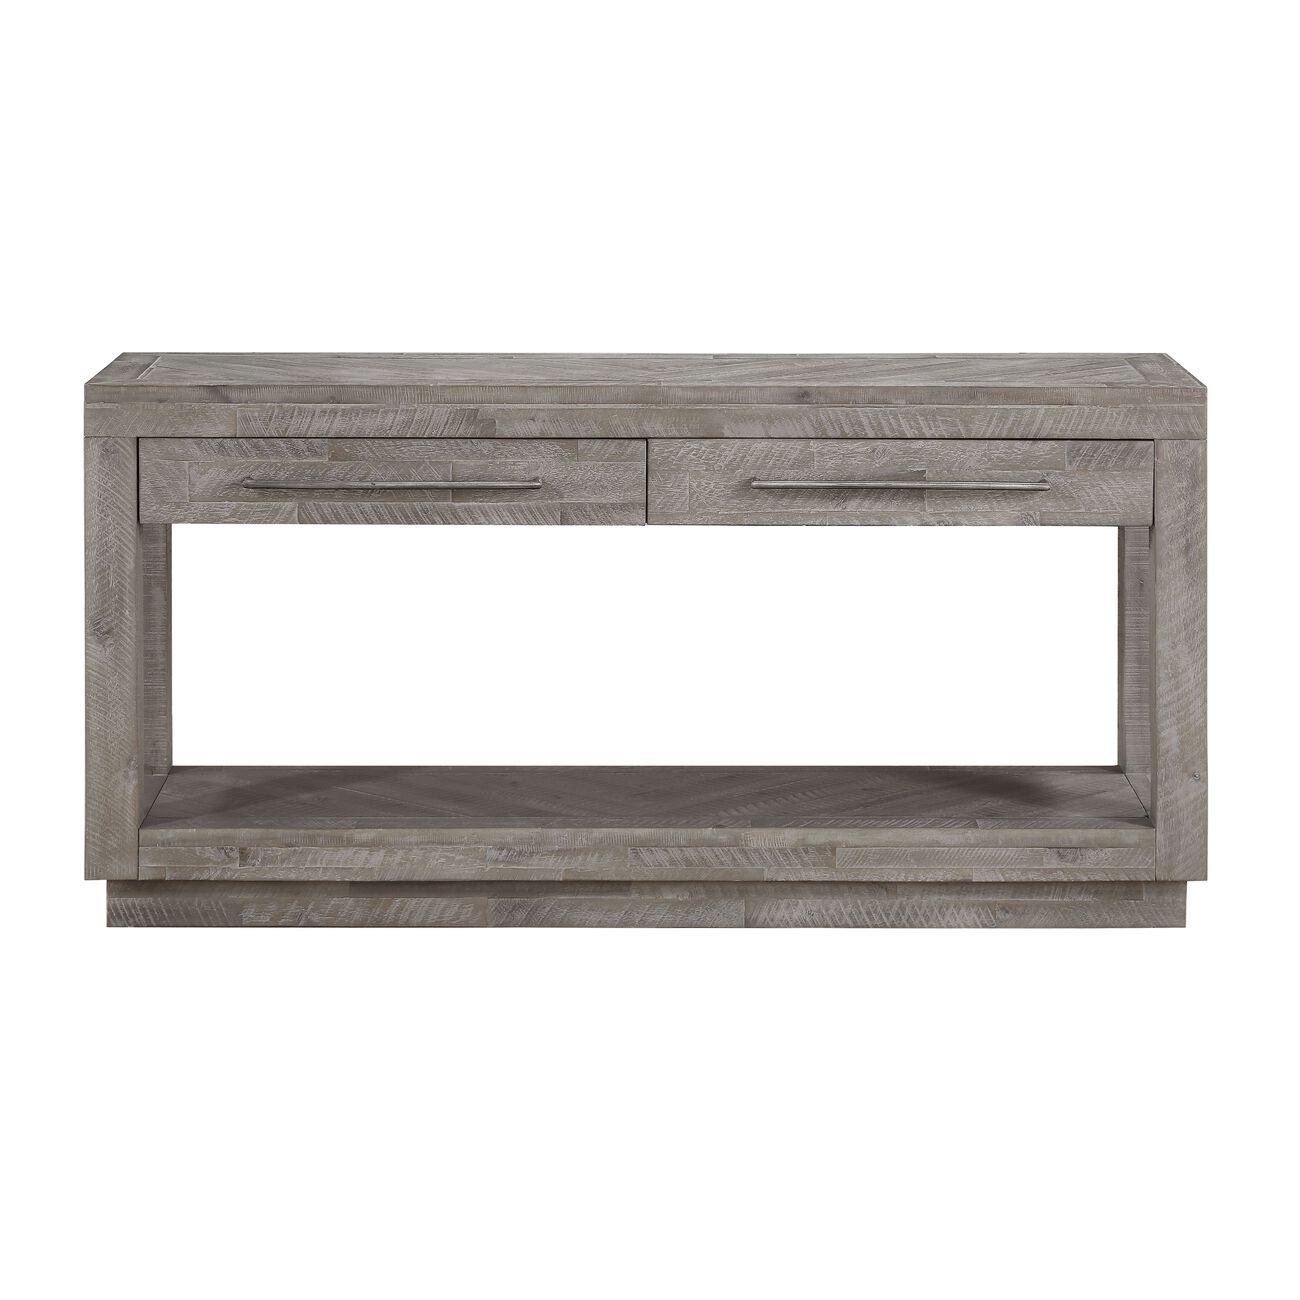 Two Drawer and One Bottom Shelf Console Table with Metal Handle Pull, Rustic Latte Gray